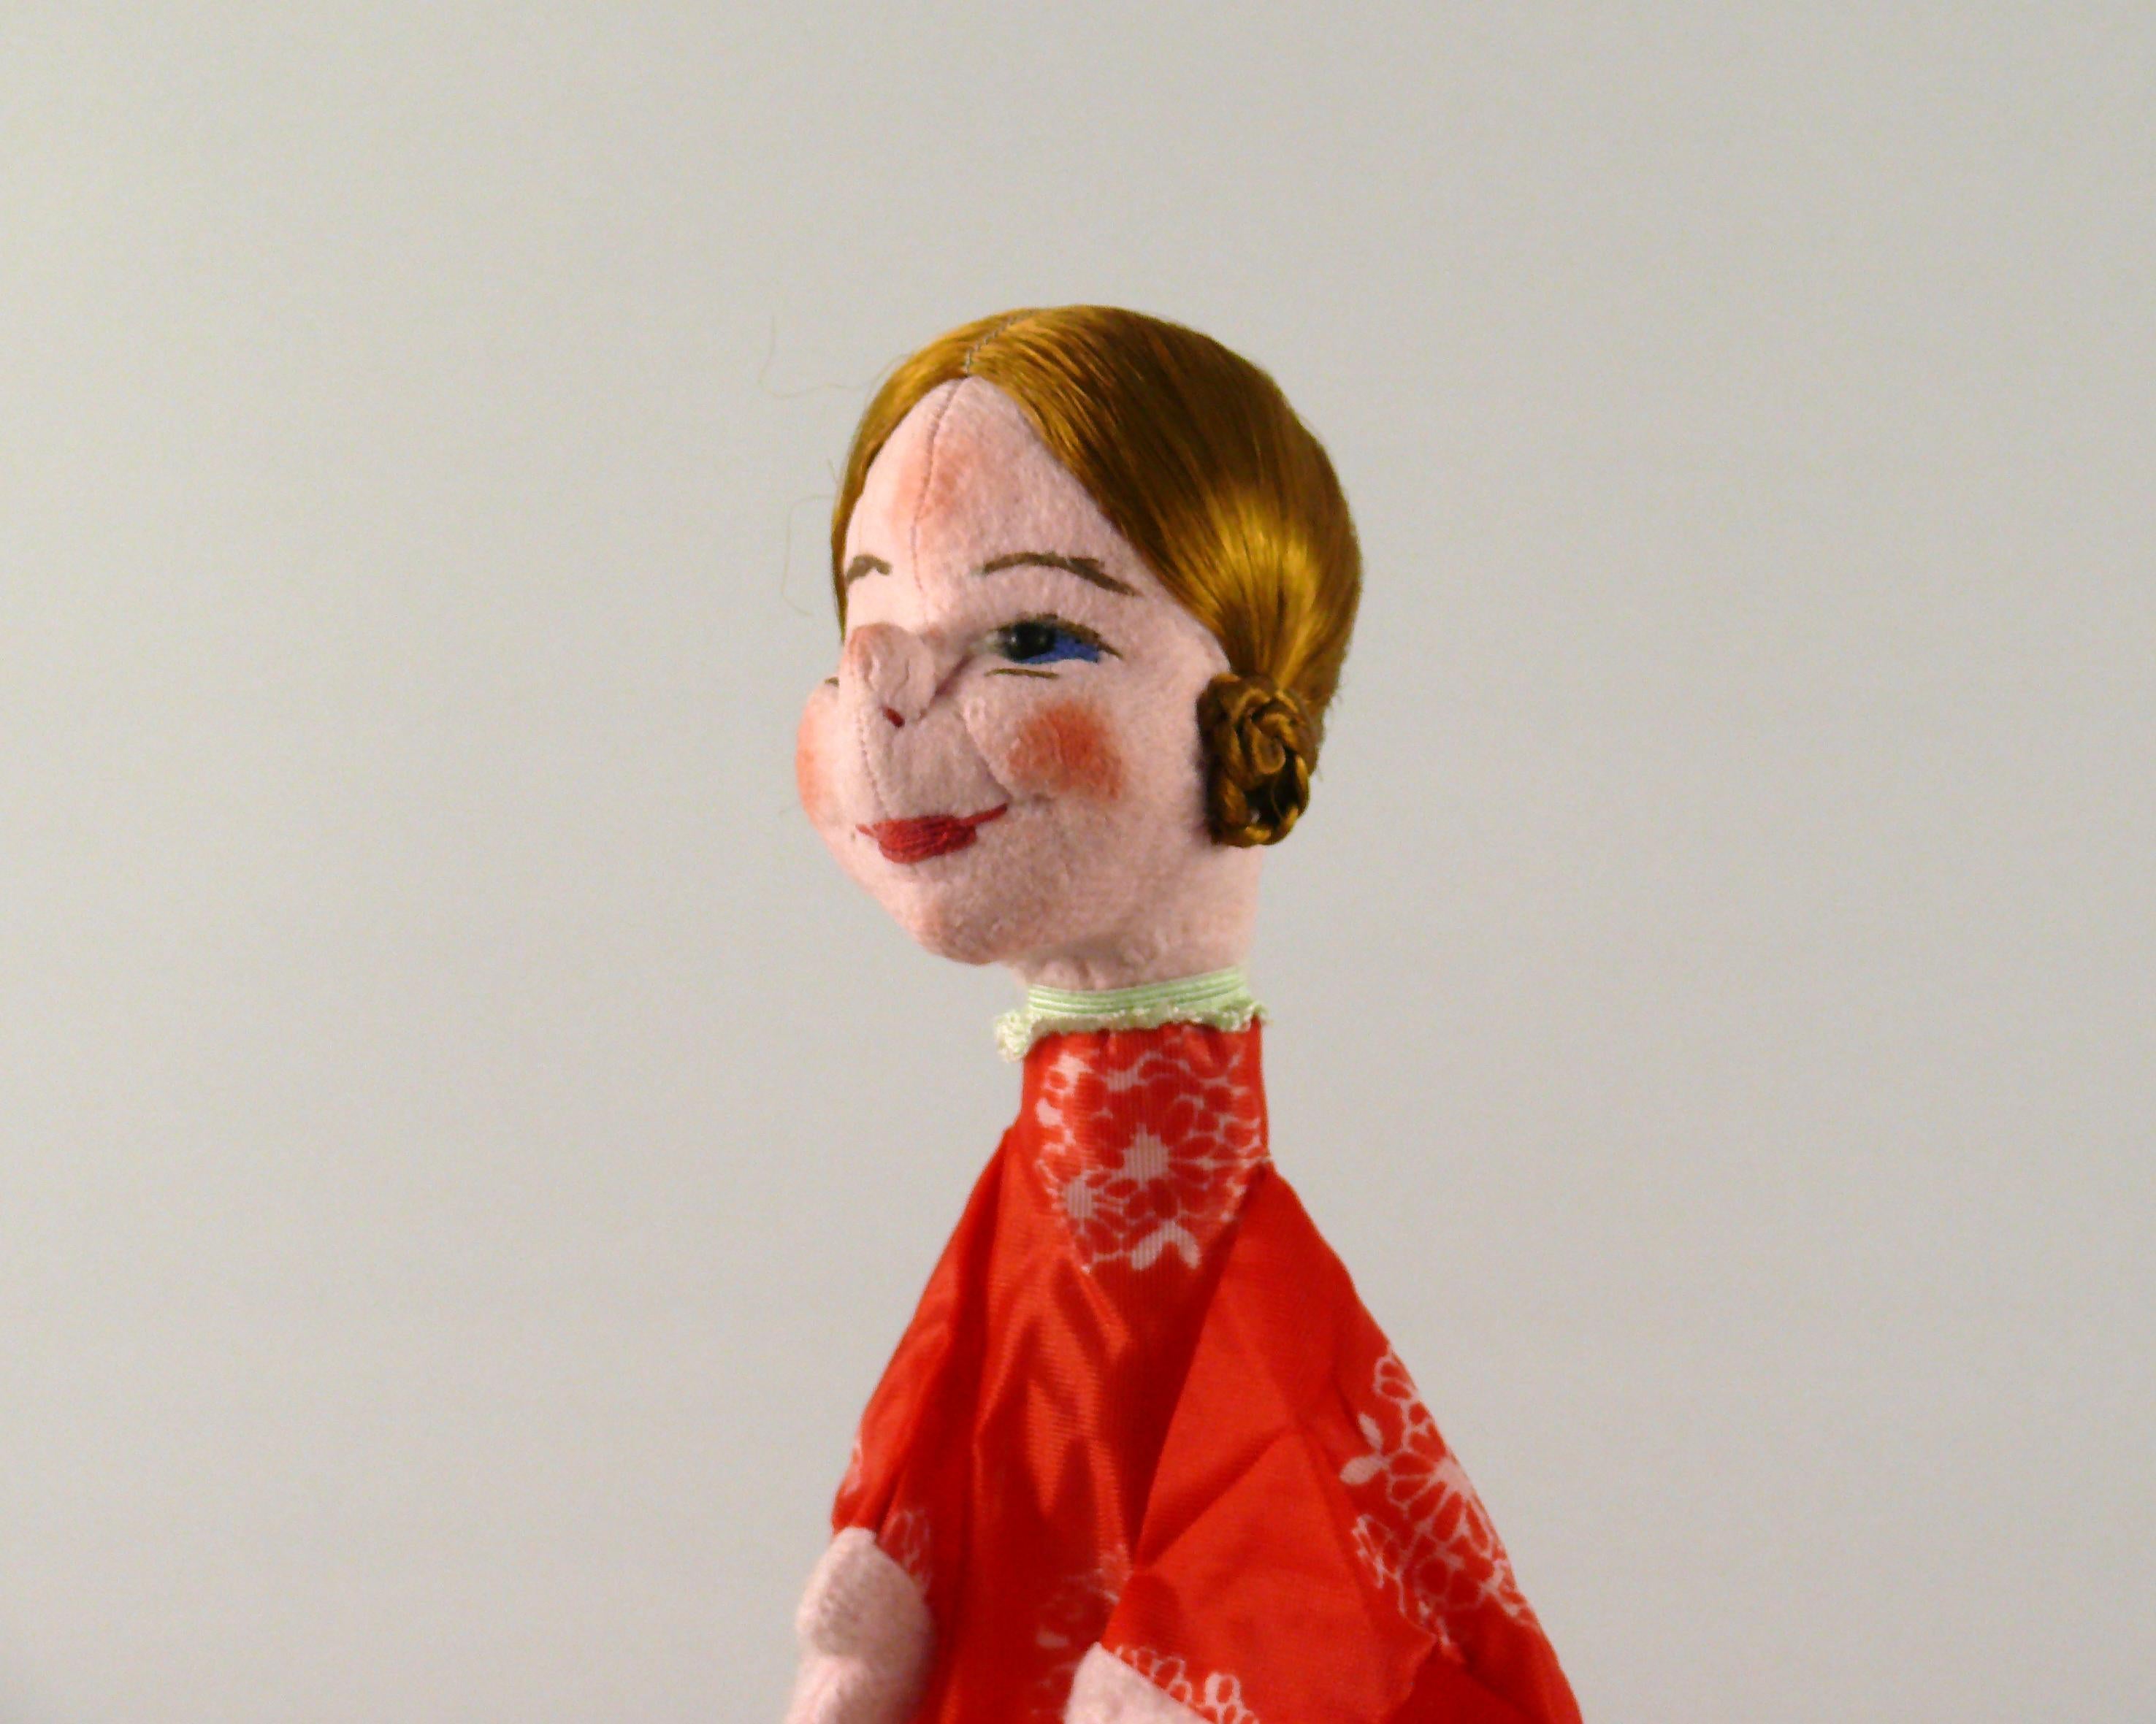 Handmade original Dresden artist dolls / hand puppet - Gretel, as good as new. Collector's item from the former GDR.
Special artist doll with legs, high quality and great collector's value.

Height approx. 35 cm - textiles, cardboard, cotton wool,